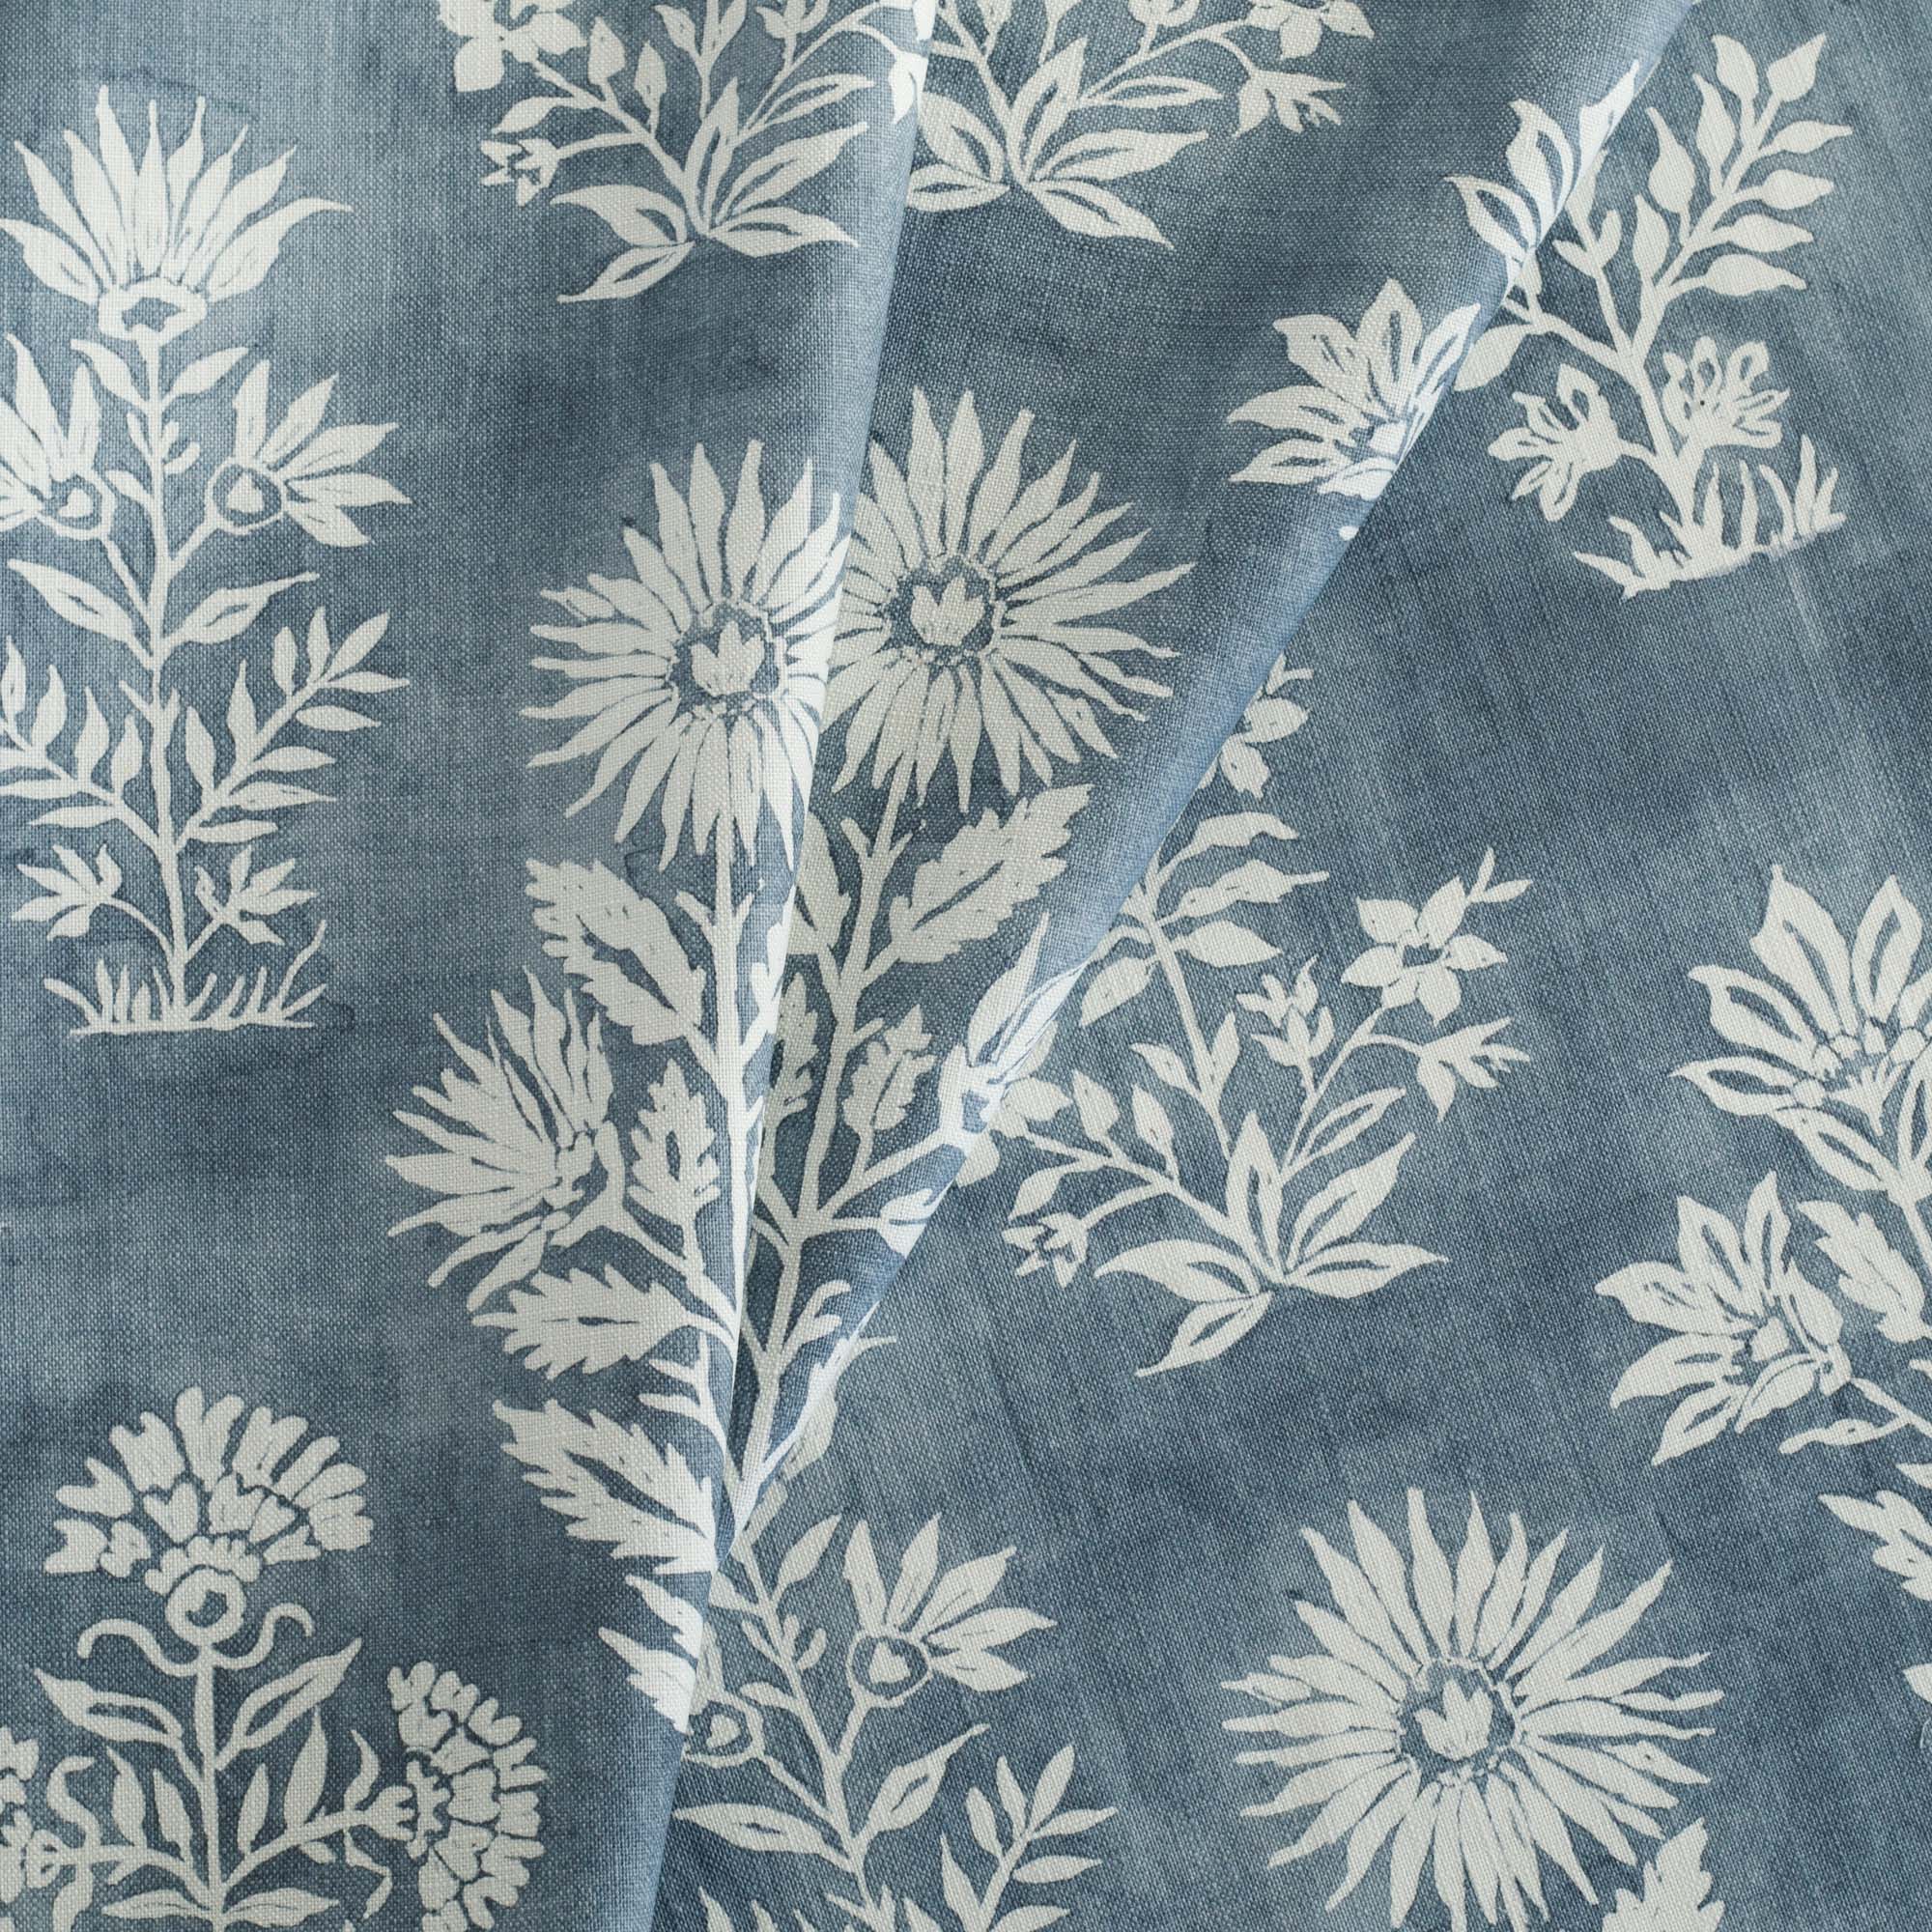 an indigo blue and white floral print fabric : close up view 4